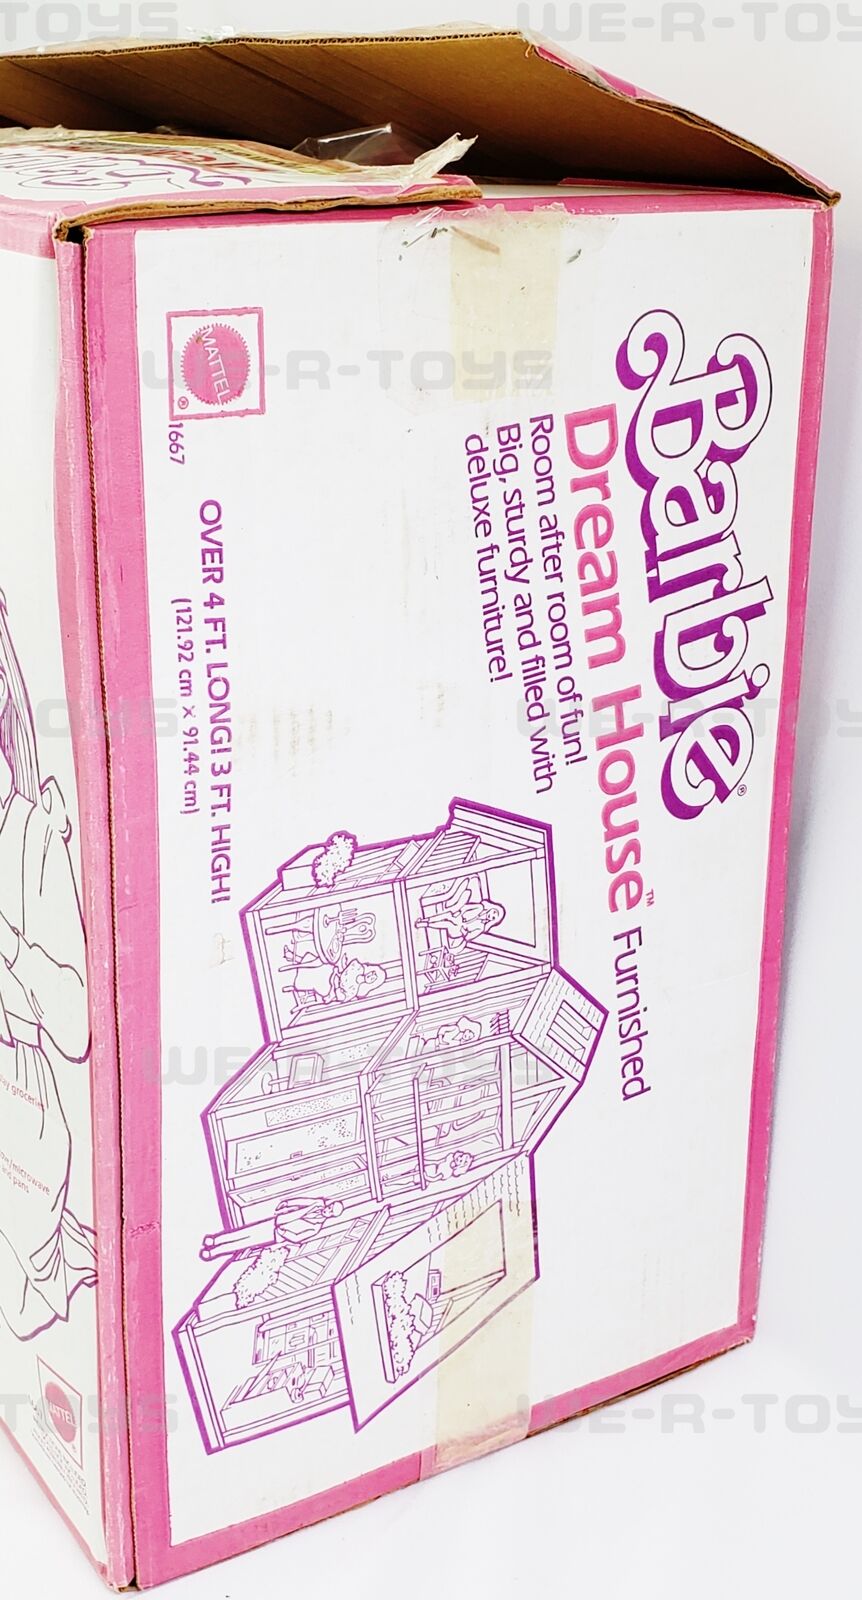 Barbie Dream House 1985 Vintage Mattel No. 1667 With Shipper Box NEW